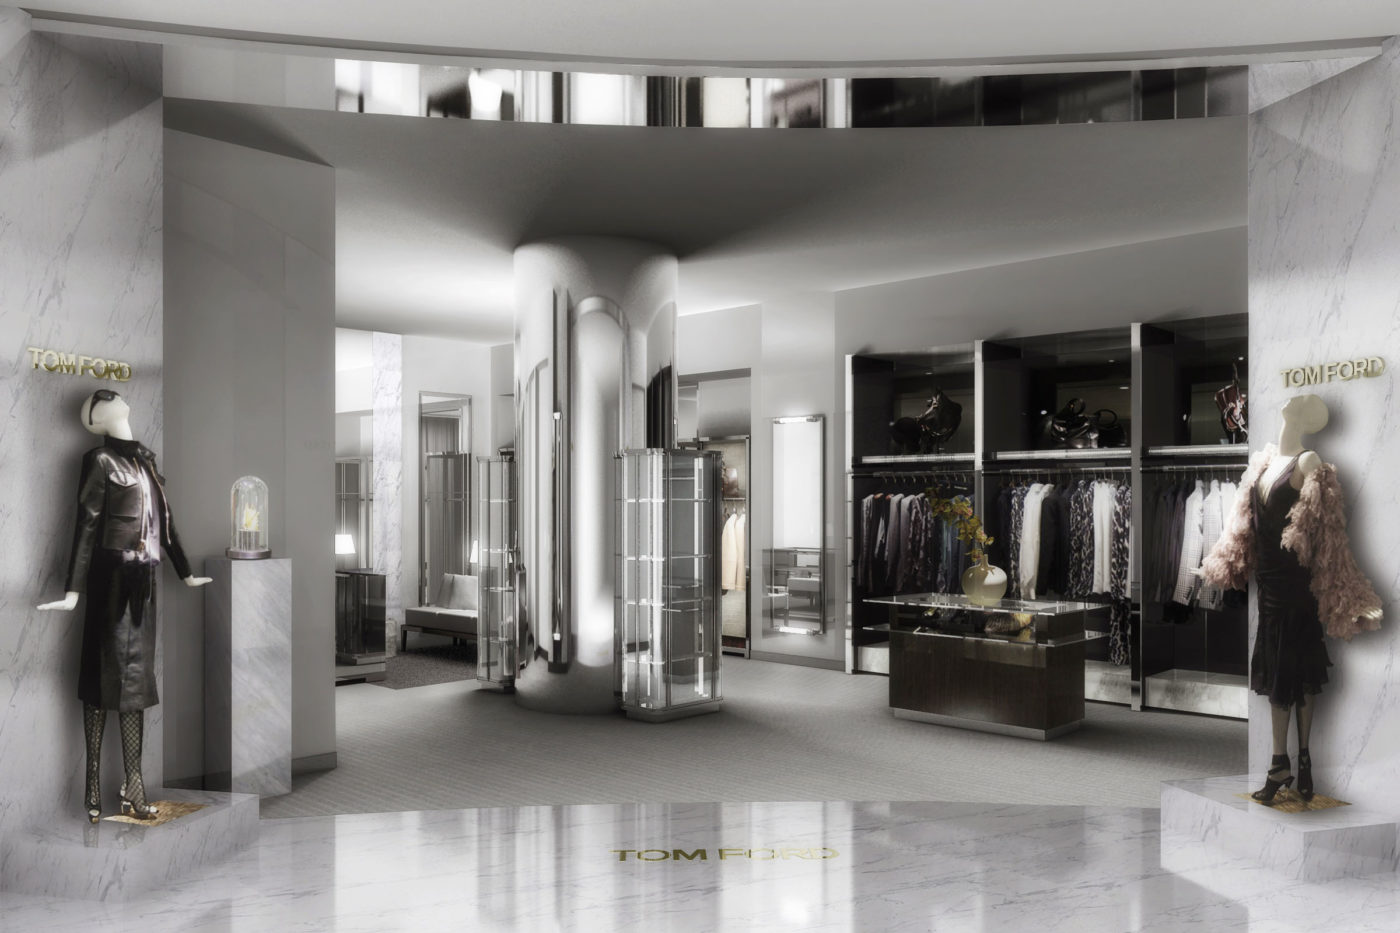 Tom Ford Flagship Store London